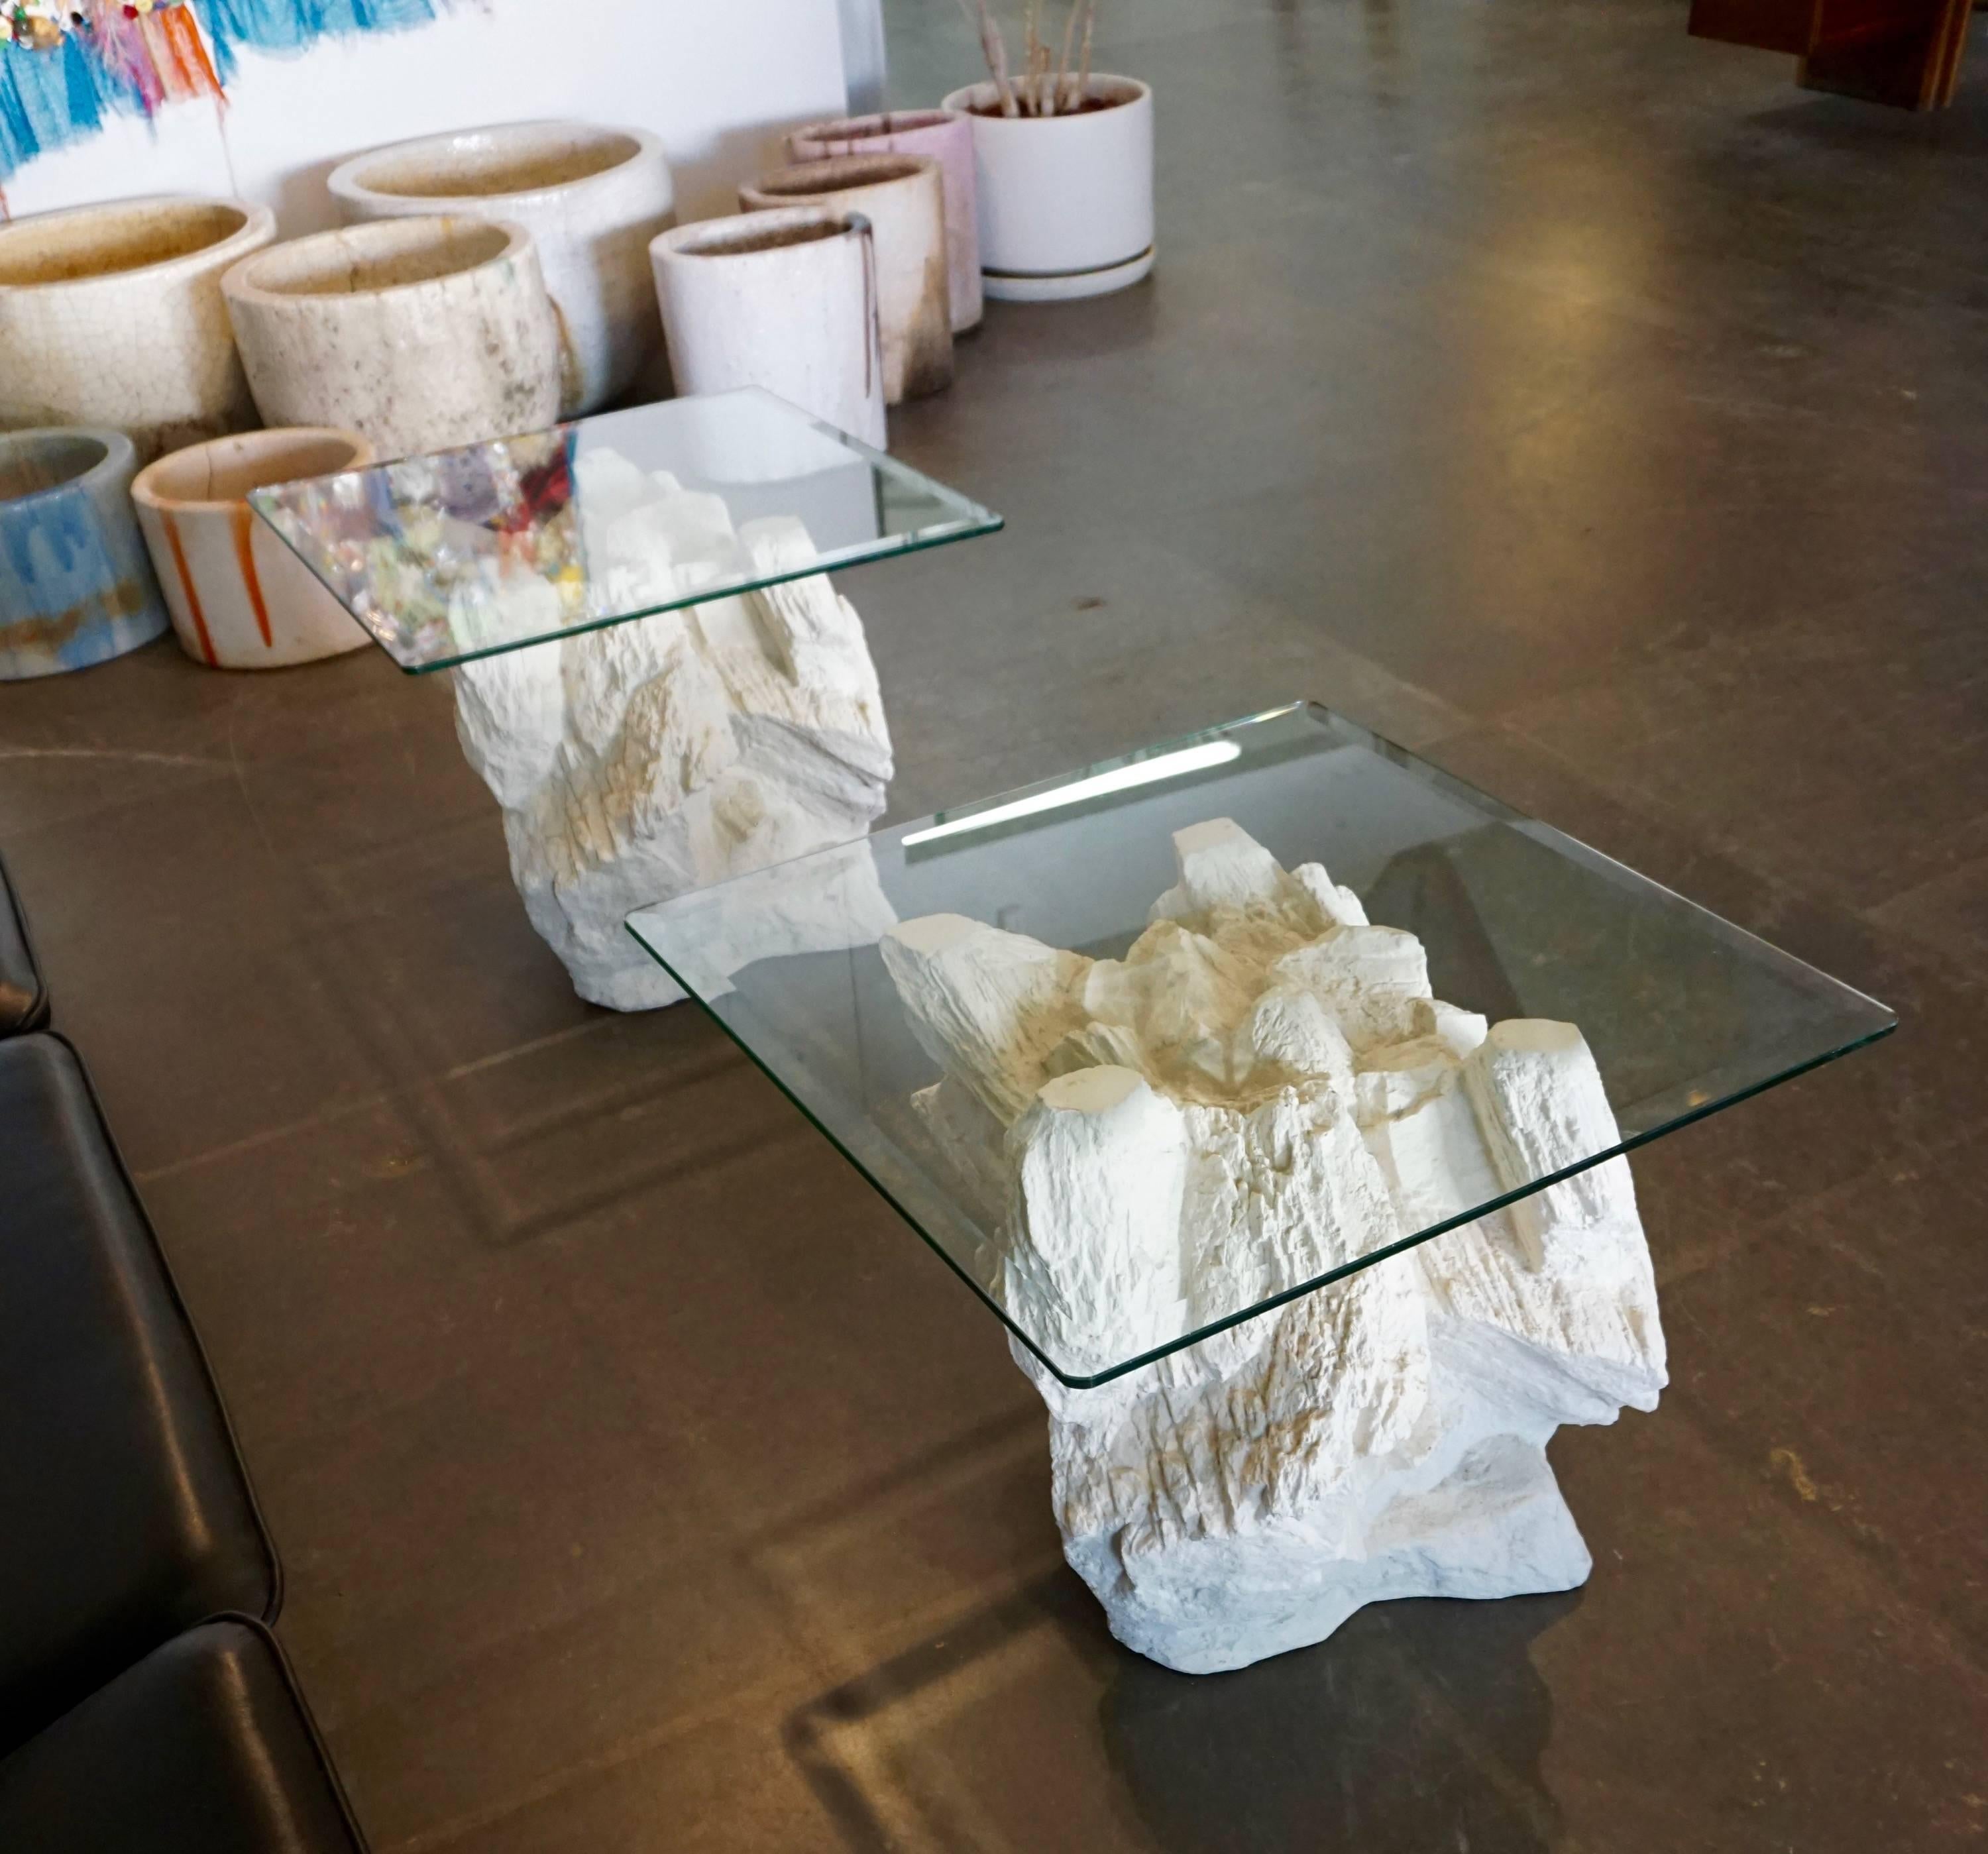 Hollow cast plaster giving the impression of a pile of rocks. Off-white in color with beveled glass tops. Also available are a console and a coffee table.
The bases measure 19.5